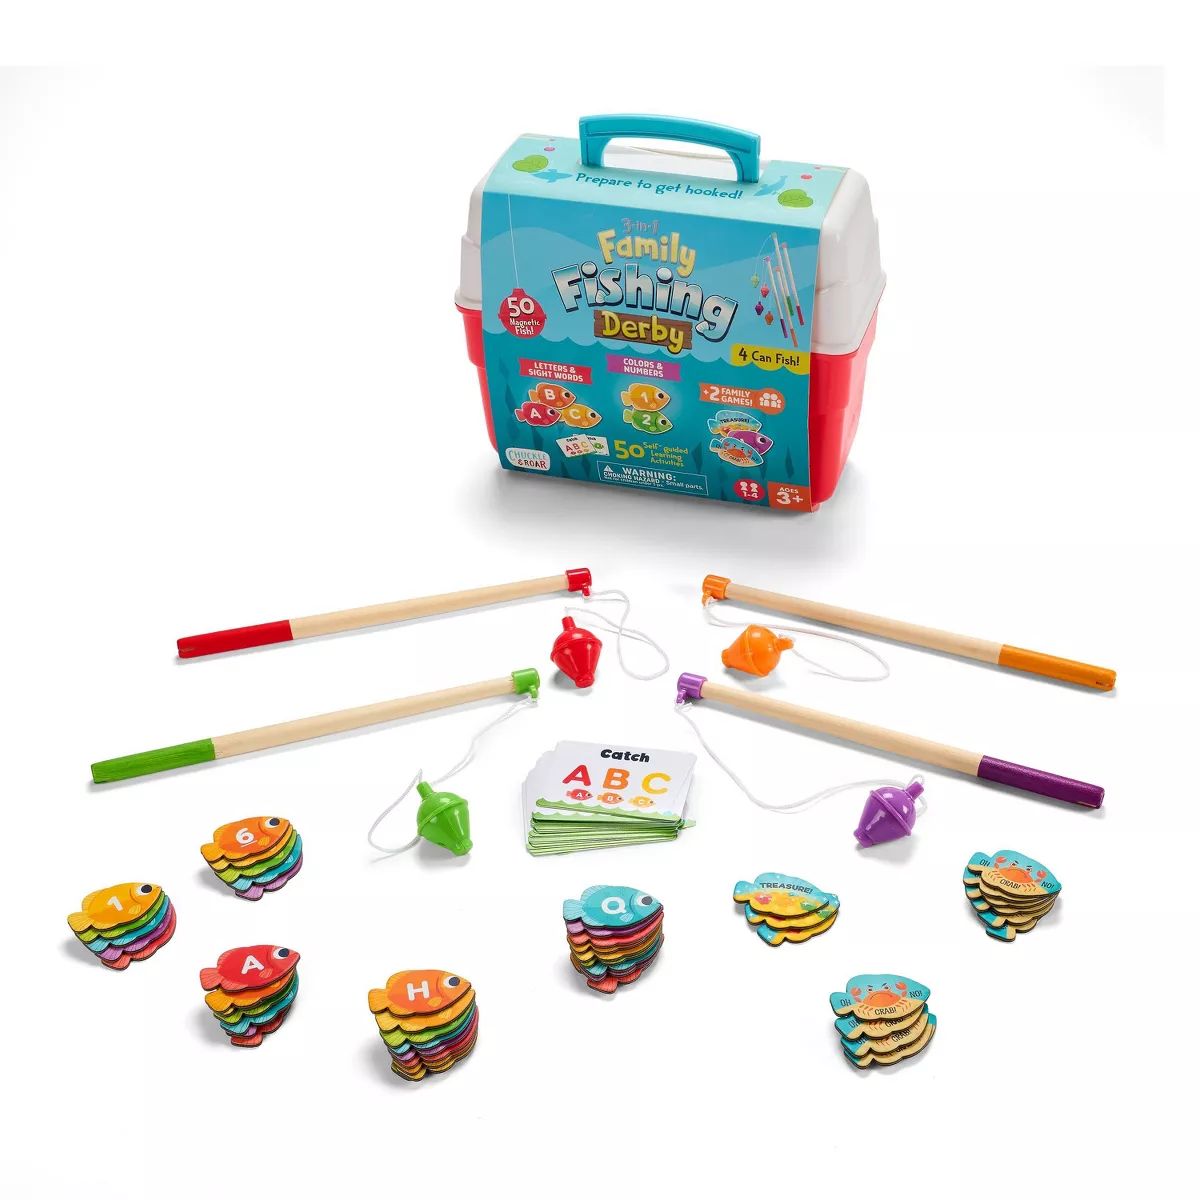 Chuckle & Roar 3-in-1 Family Fishing Derby Game | Target